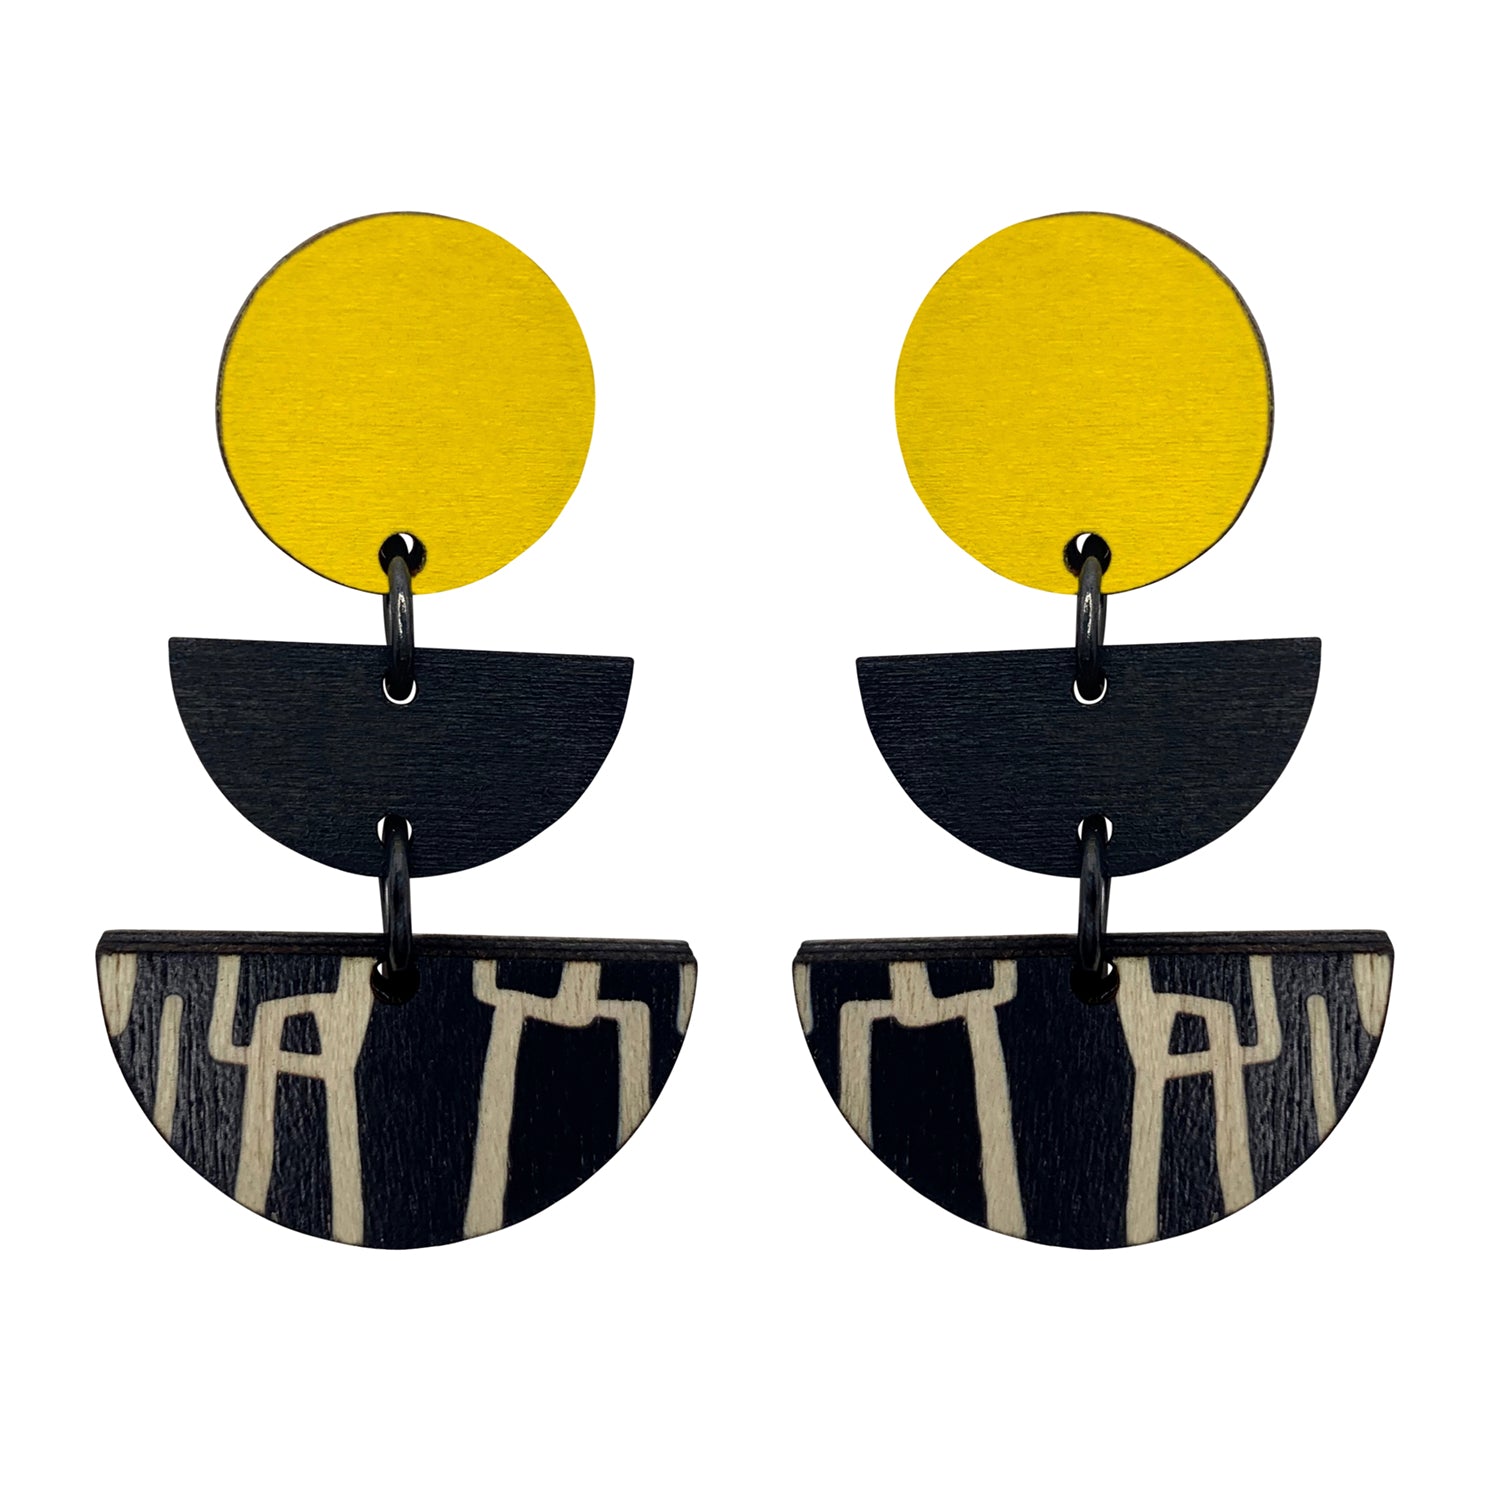 3 tiered wooden city earrings with yellow and black